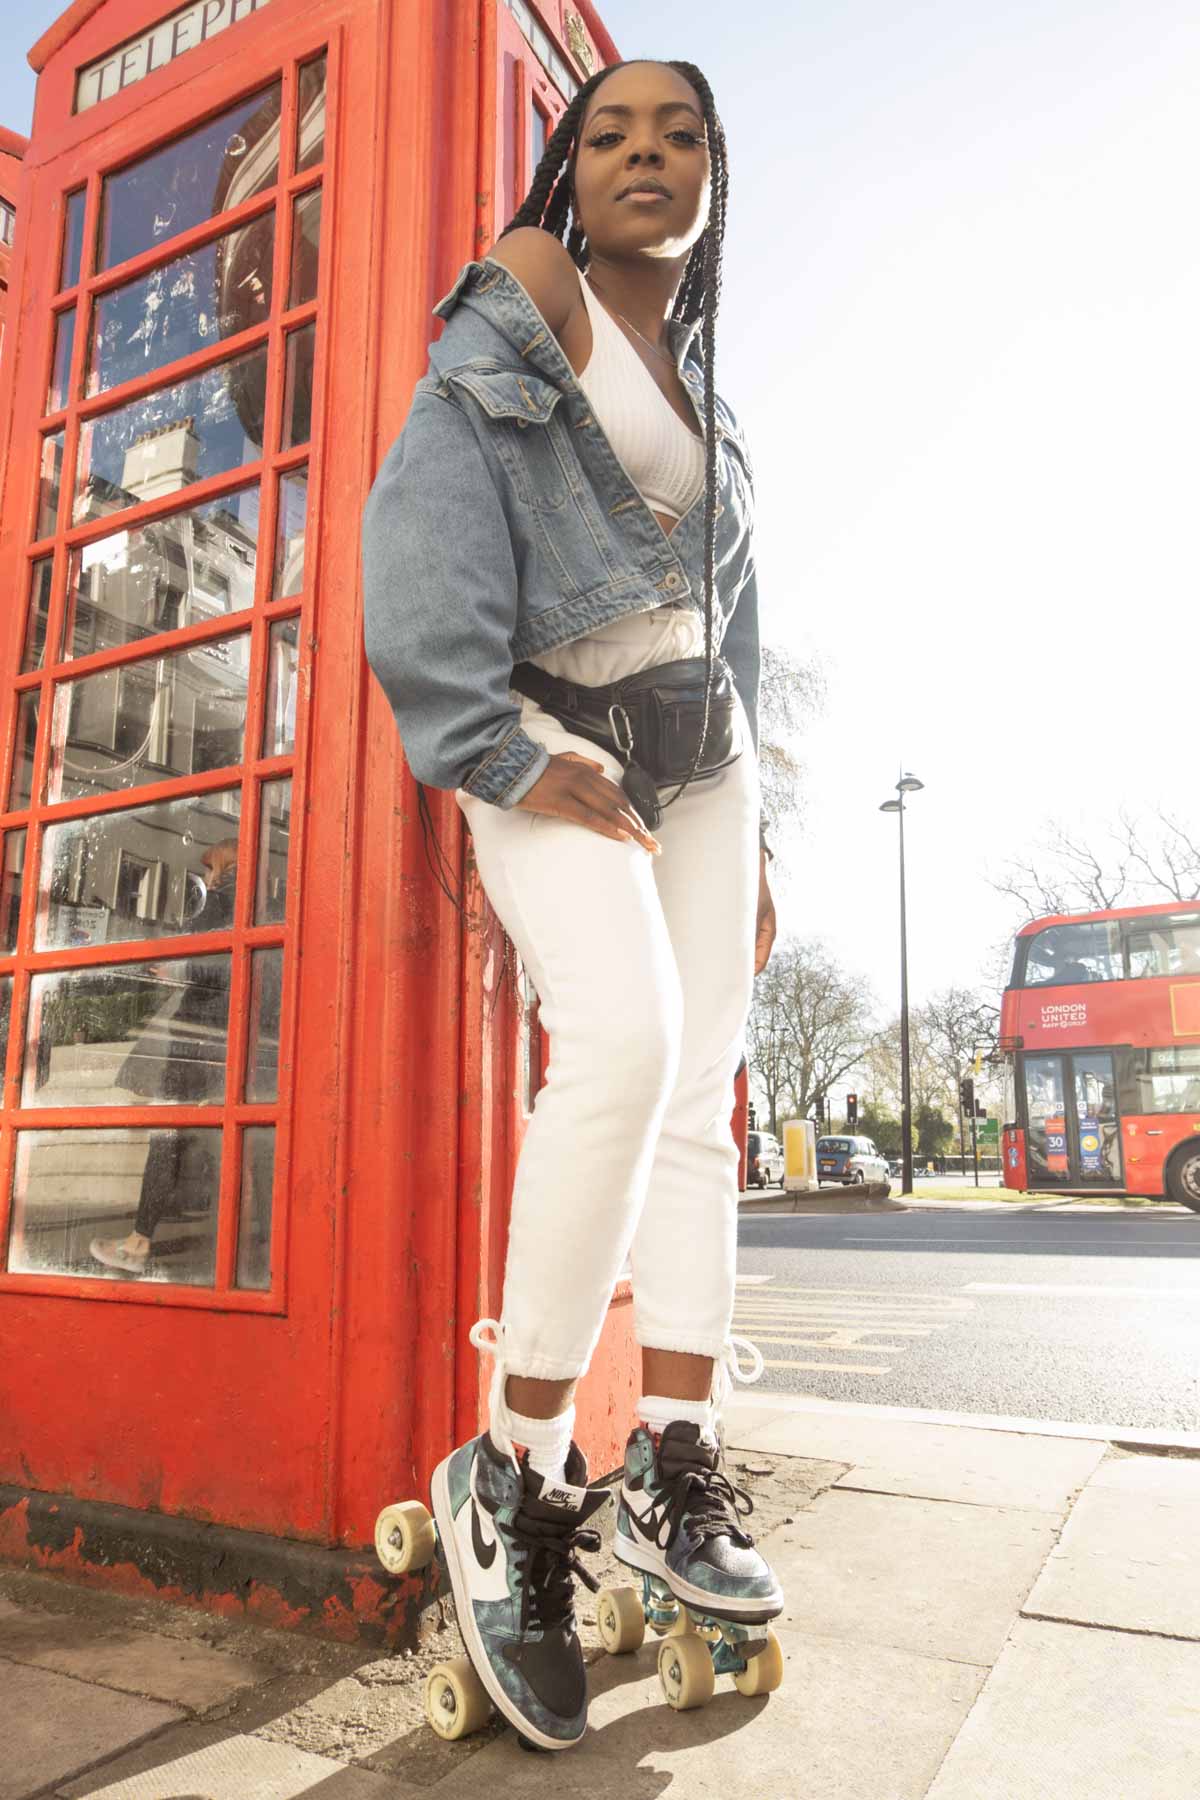 a portrait of a roller skater girl posing by red phone booths in London